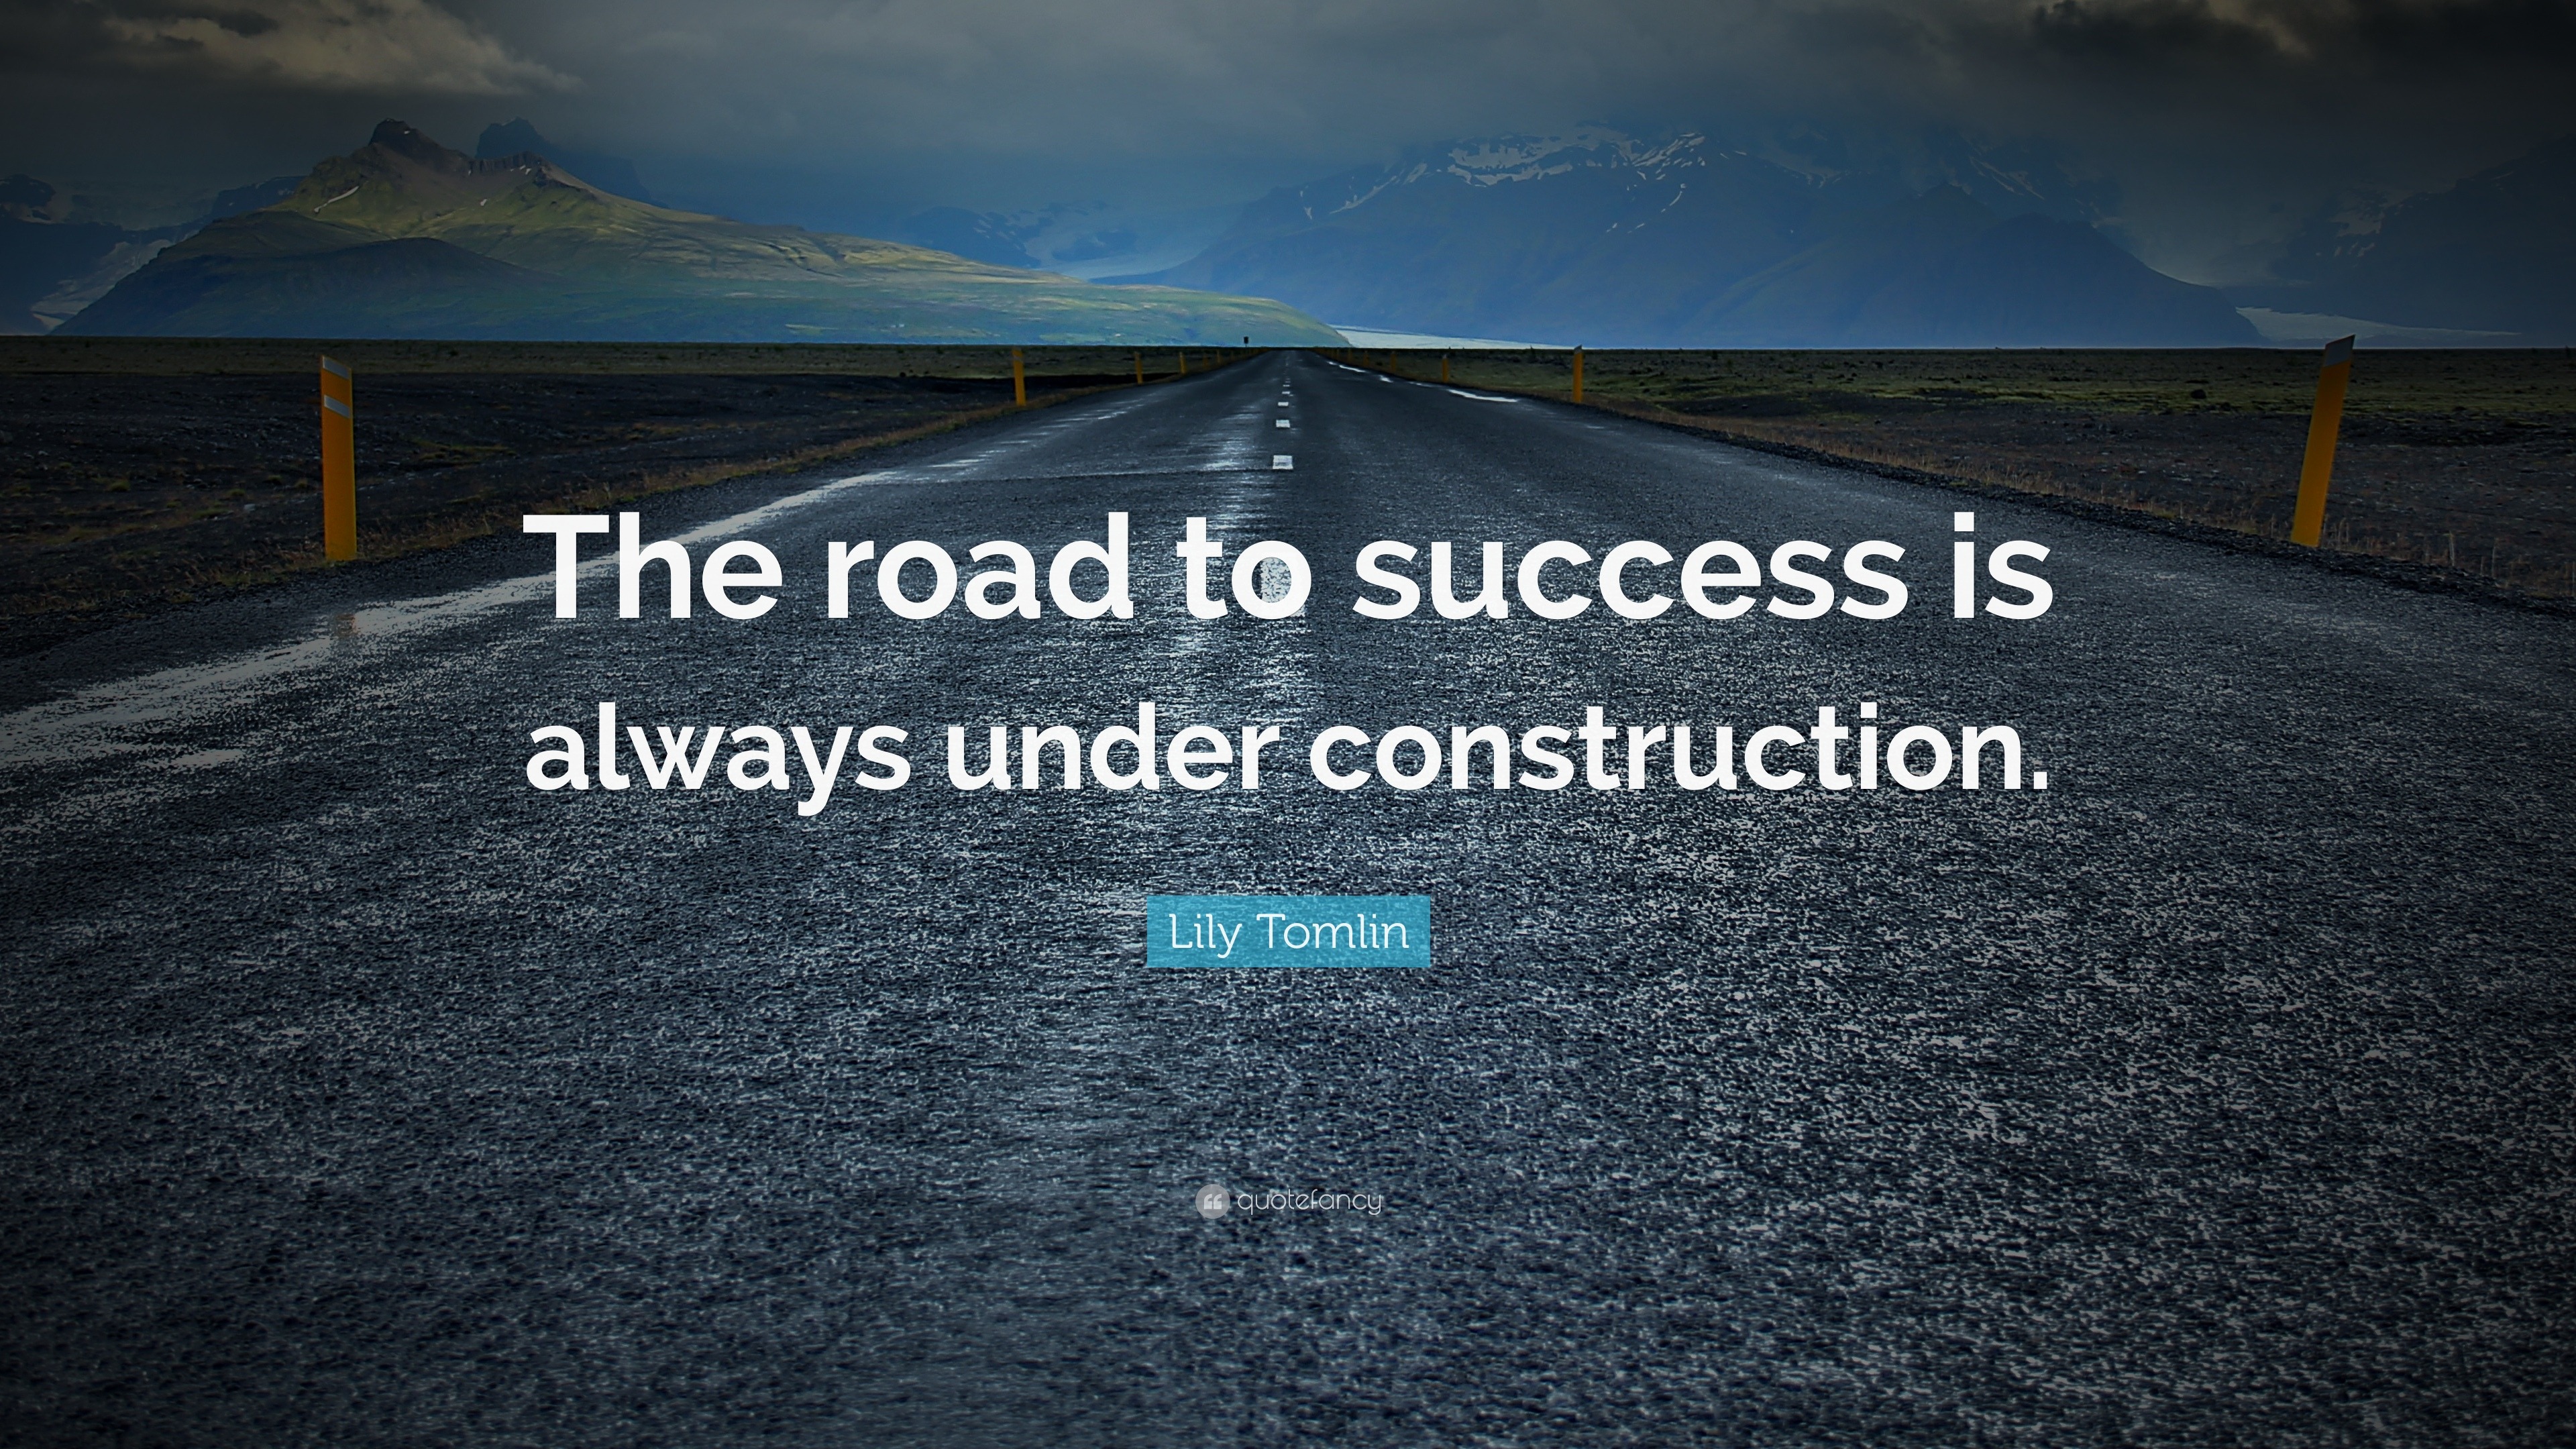 Lily Tomlin Quote: “The road to success is always under construction